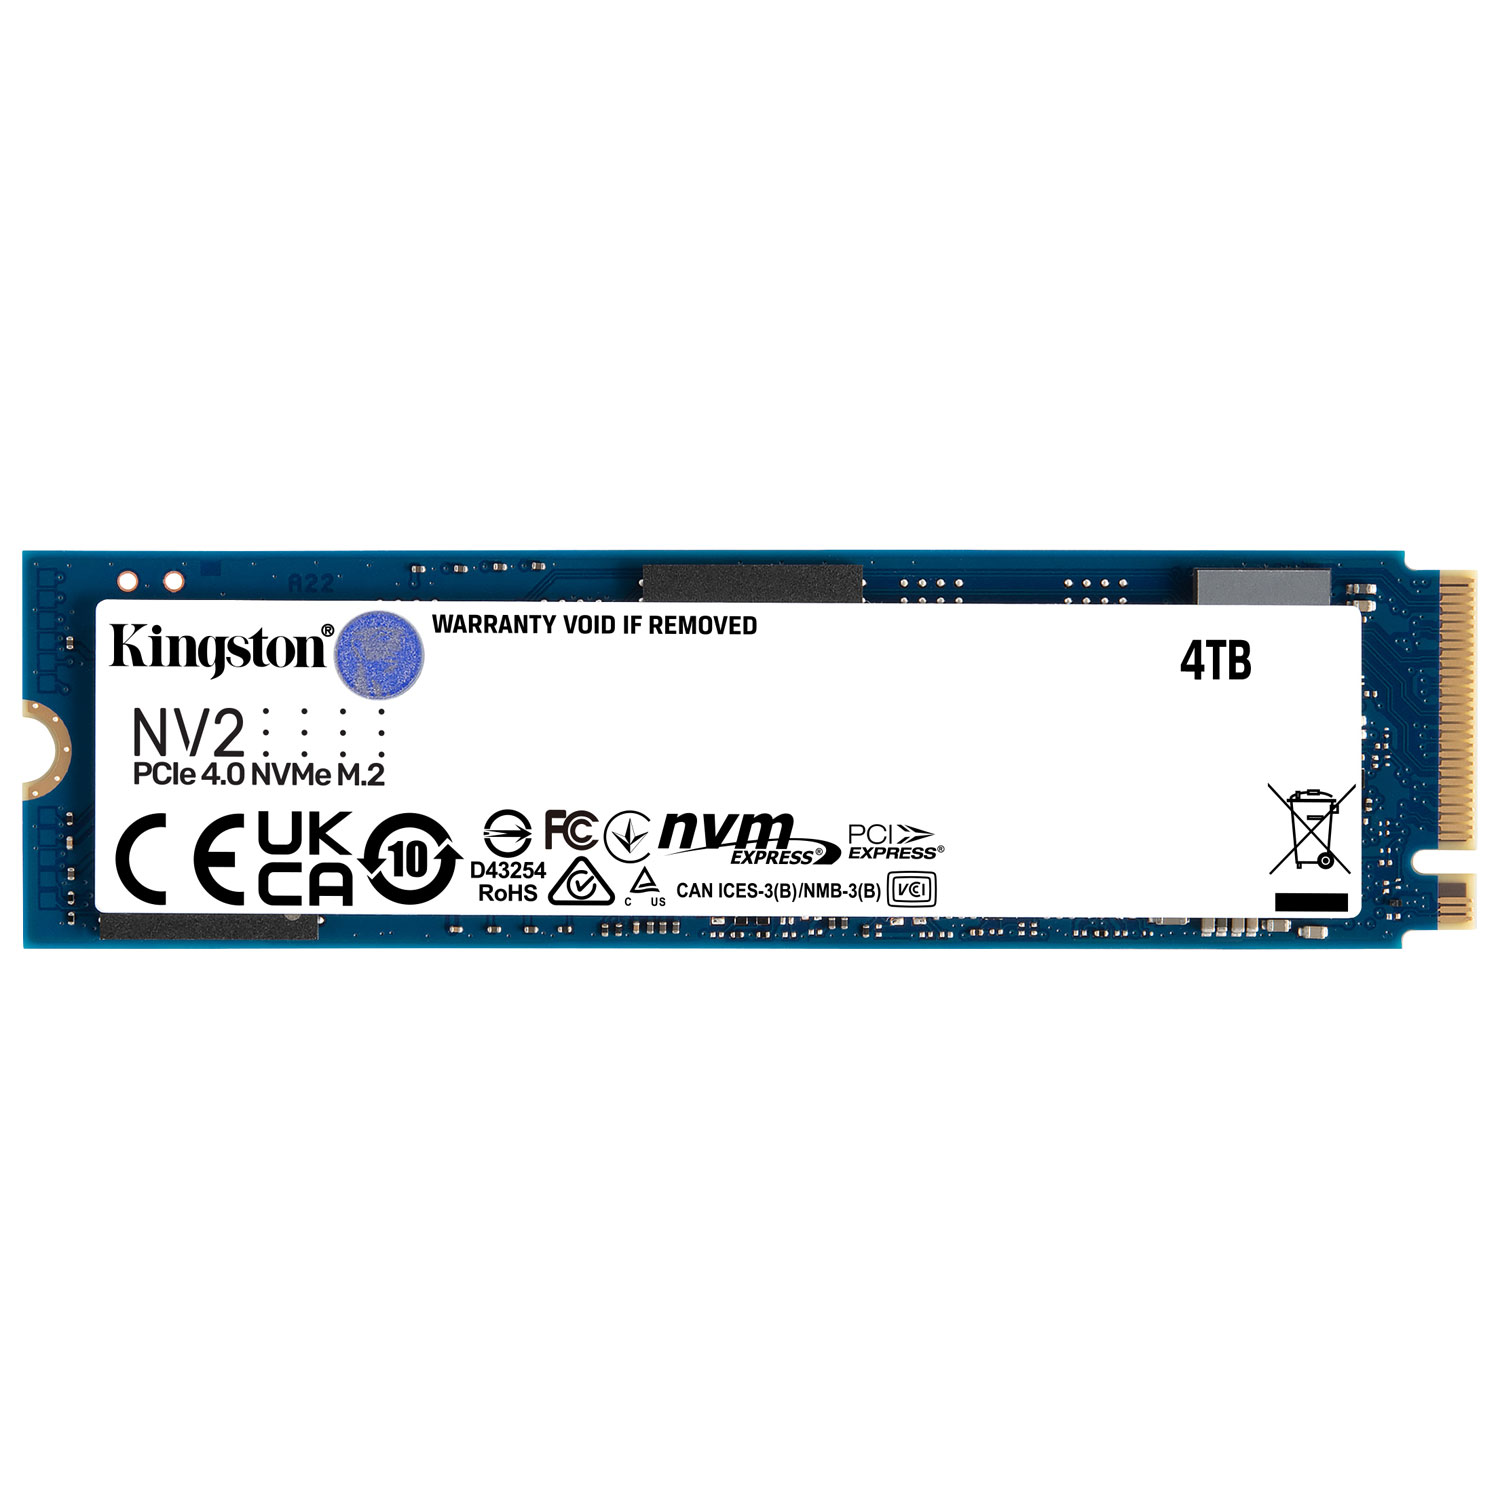 Monster Storage SSD 4TB NVMe PCIe Gen4×4 最大読込: 7,450MB s 最大書き：6,500MB s PS5確認済み ヒートシンク付き M.2 Type 2280 3D TLC メーカー5年保証